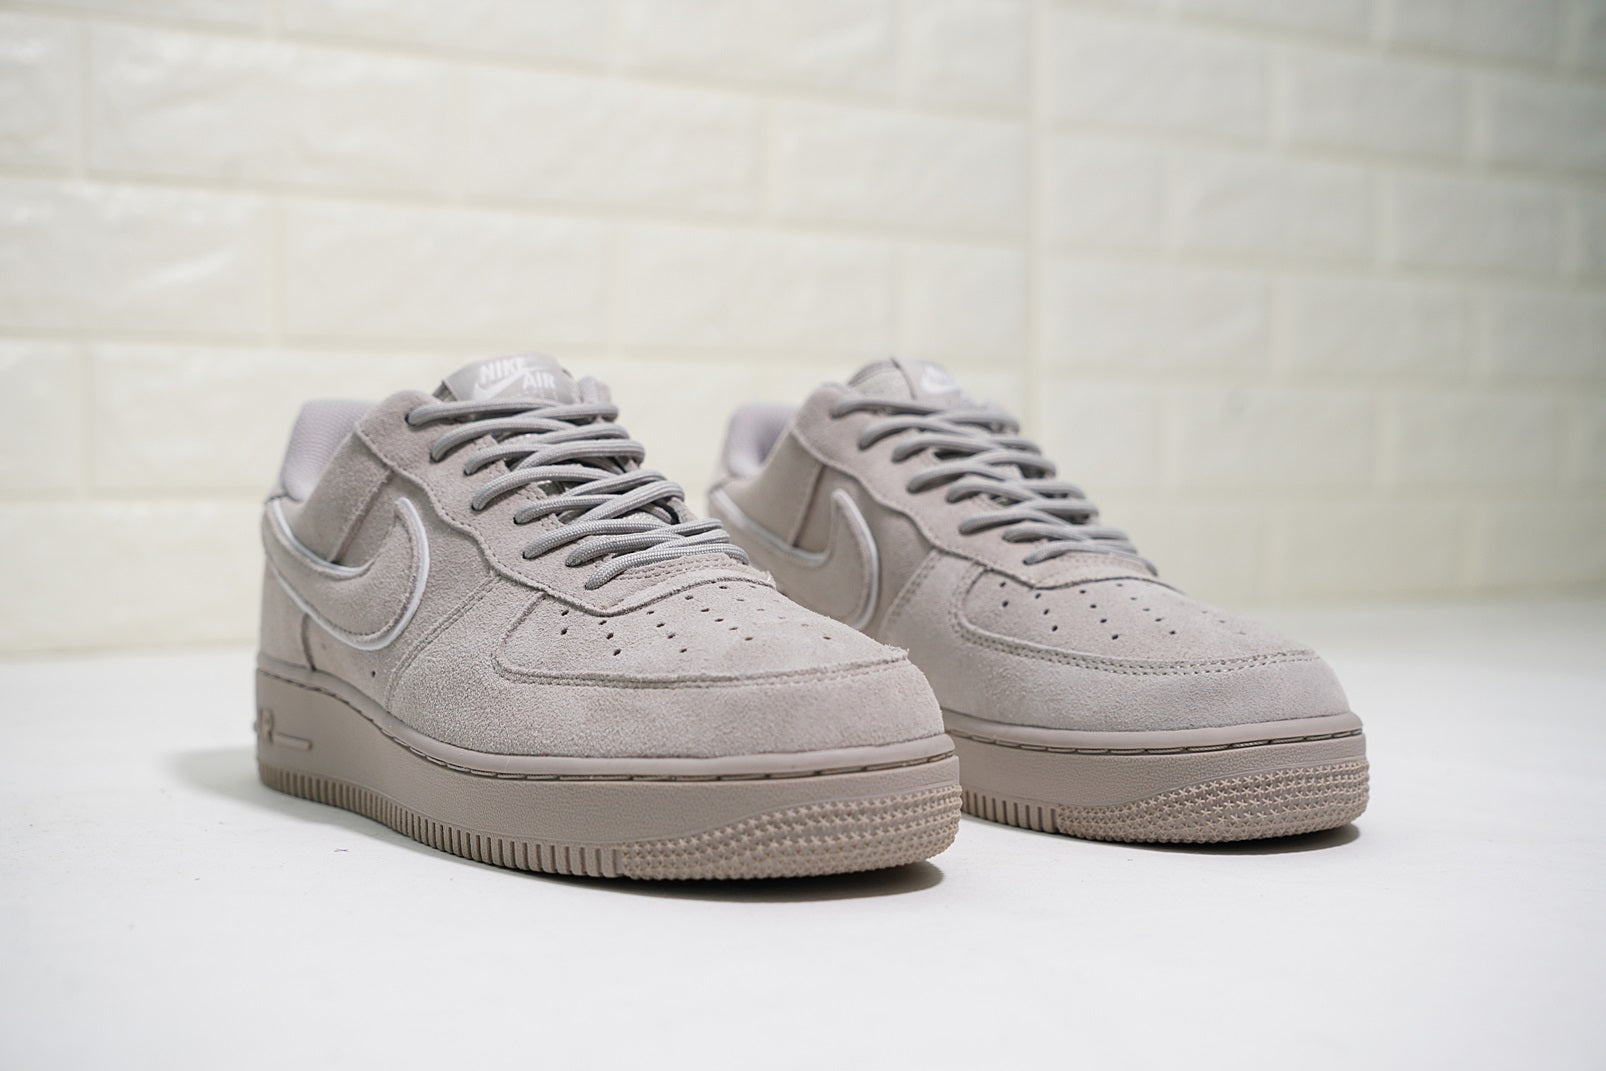 Air Force 1 07 LV8 Suede 2018 - whatever on 